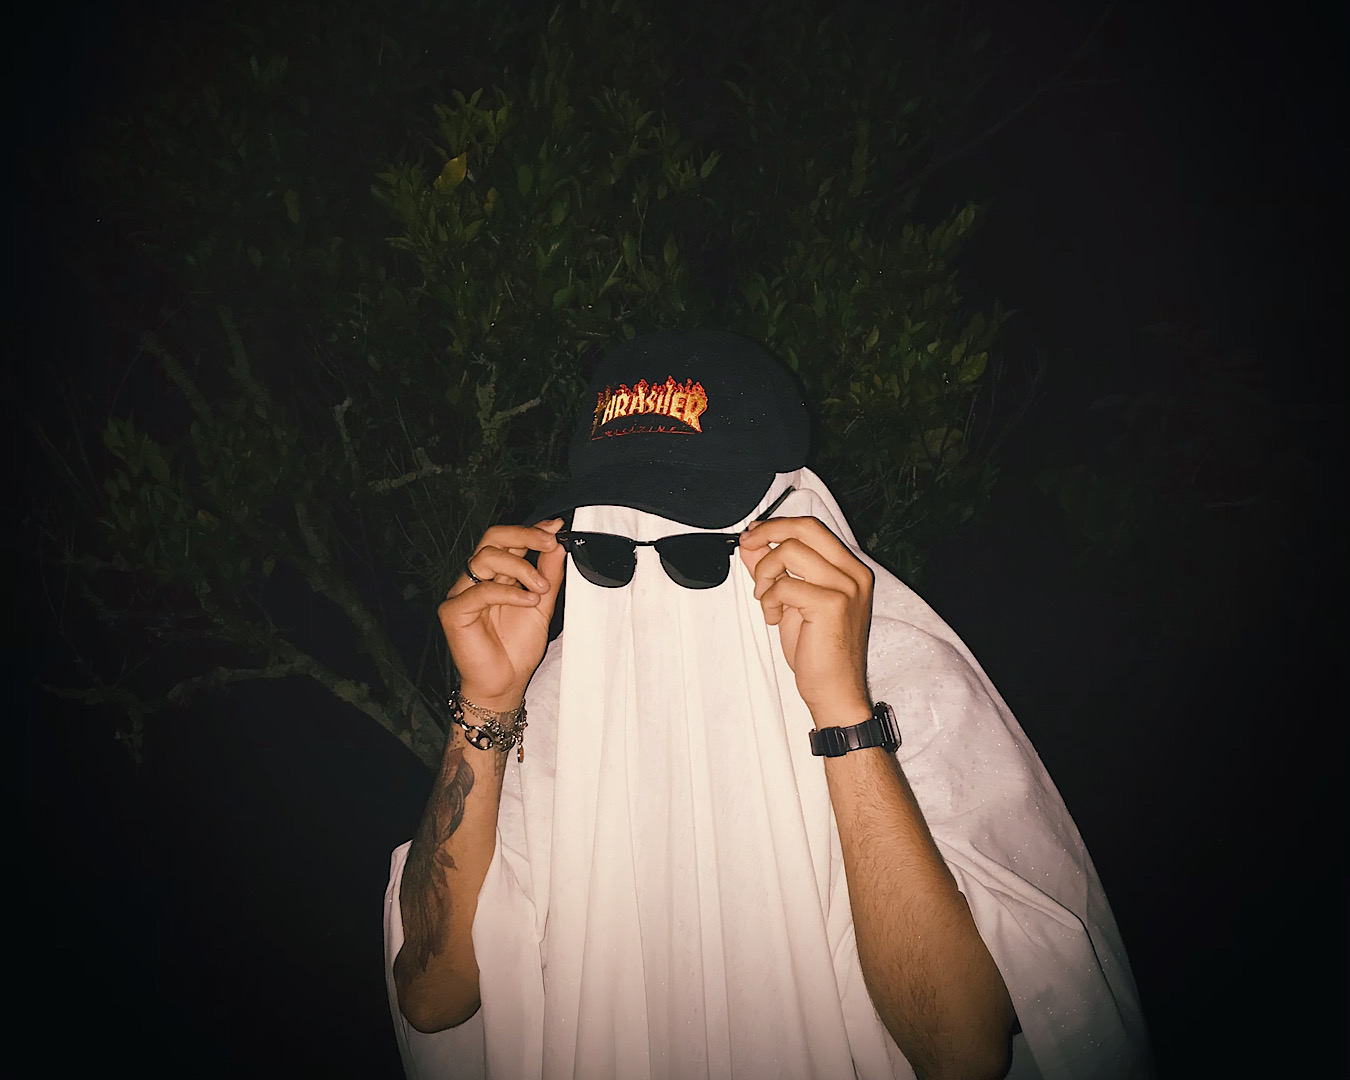 A person slides on a pair of Ray Ban sunnies to complete their ghost Halloween costume of a white sheet, a ‘Thrasher’ cap, a watch and a bracelet. We glimpse an impressive tattoo on their left forearm. 